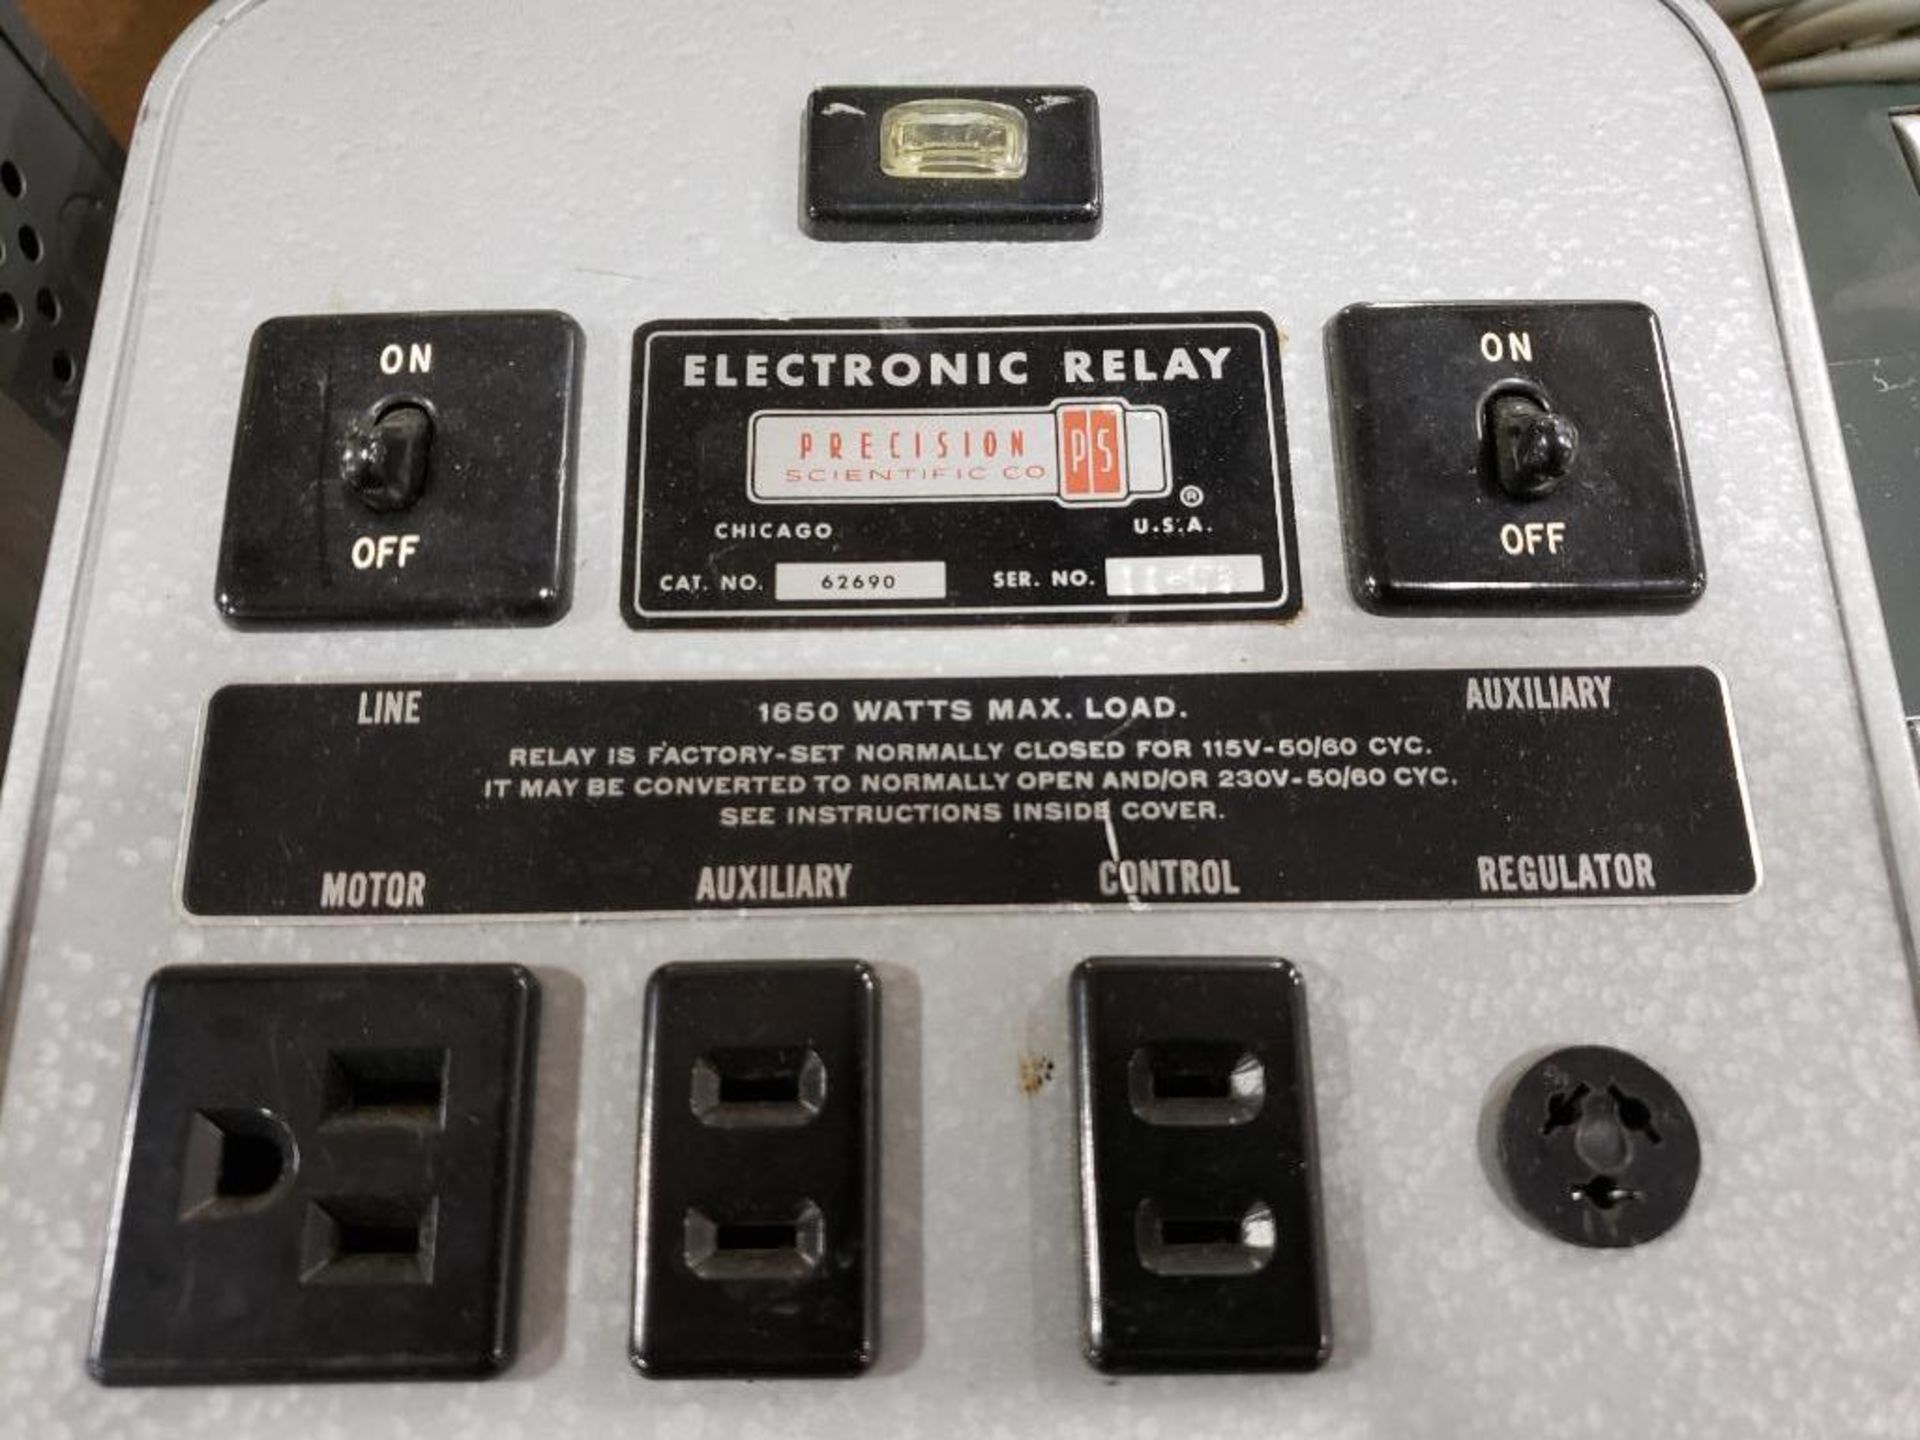 Precision Scientific electronic relay. - Image 2 of 3